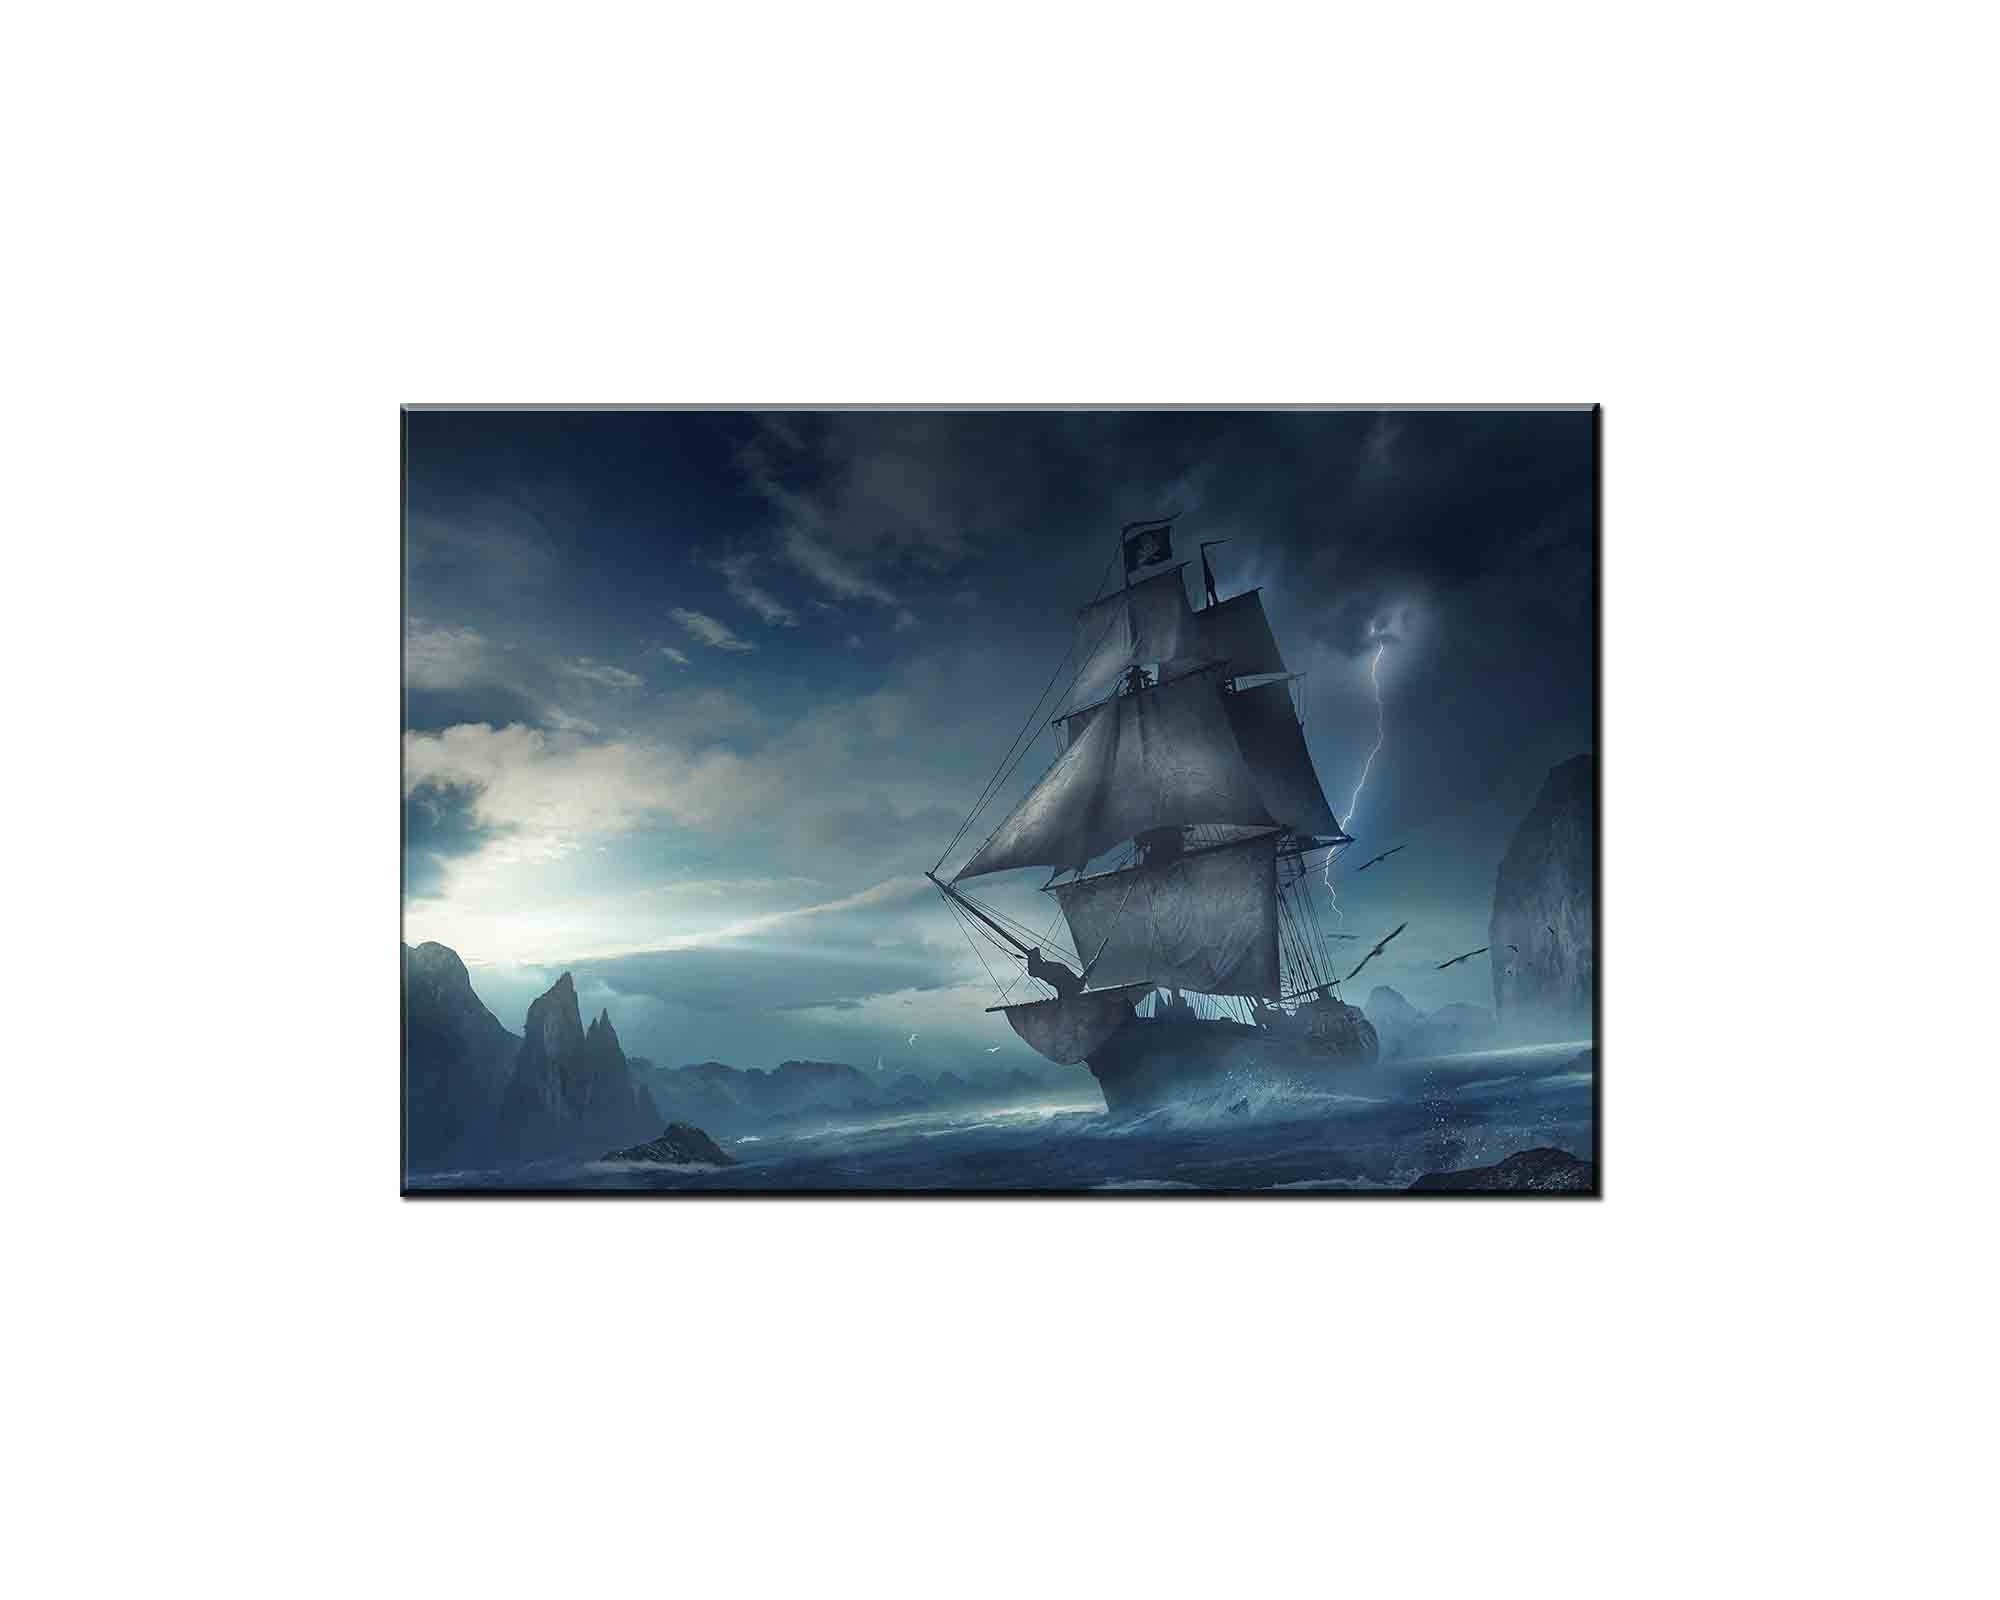 Vintage Home Wall Decor Pirate Ship Oil Painting Picture Printed On Canvas VII 